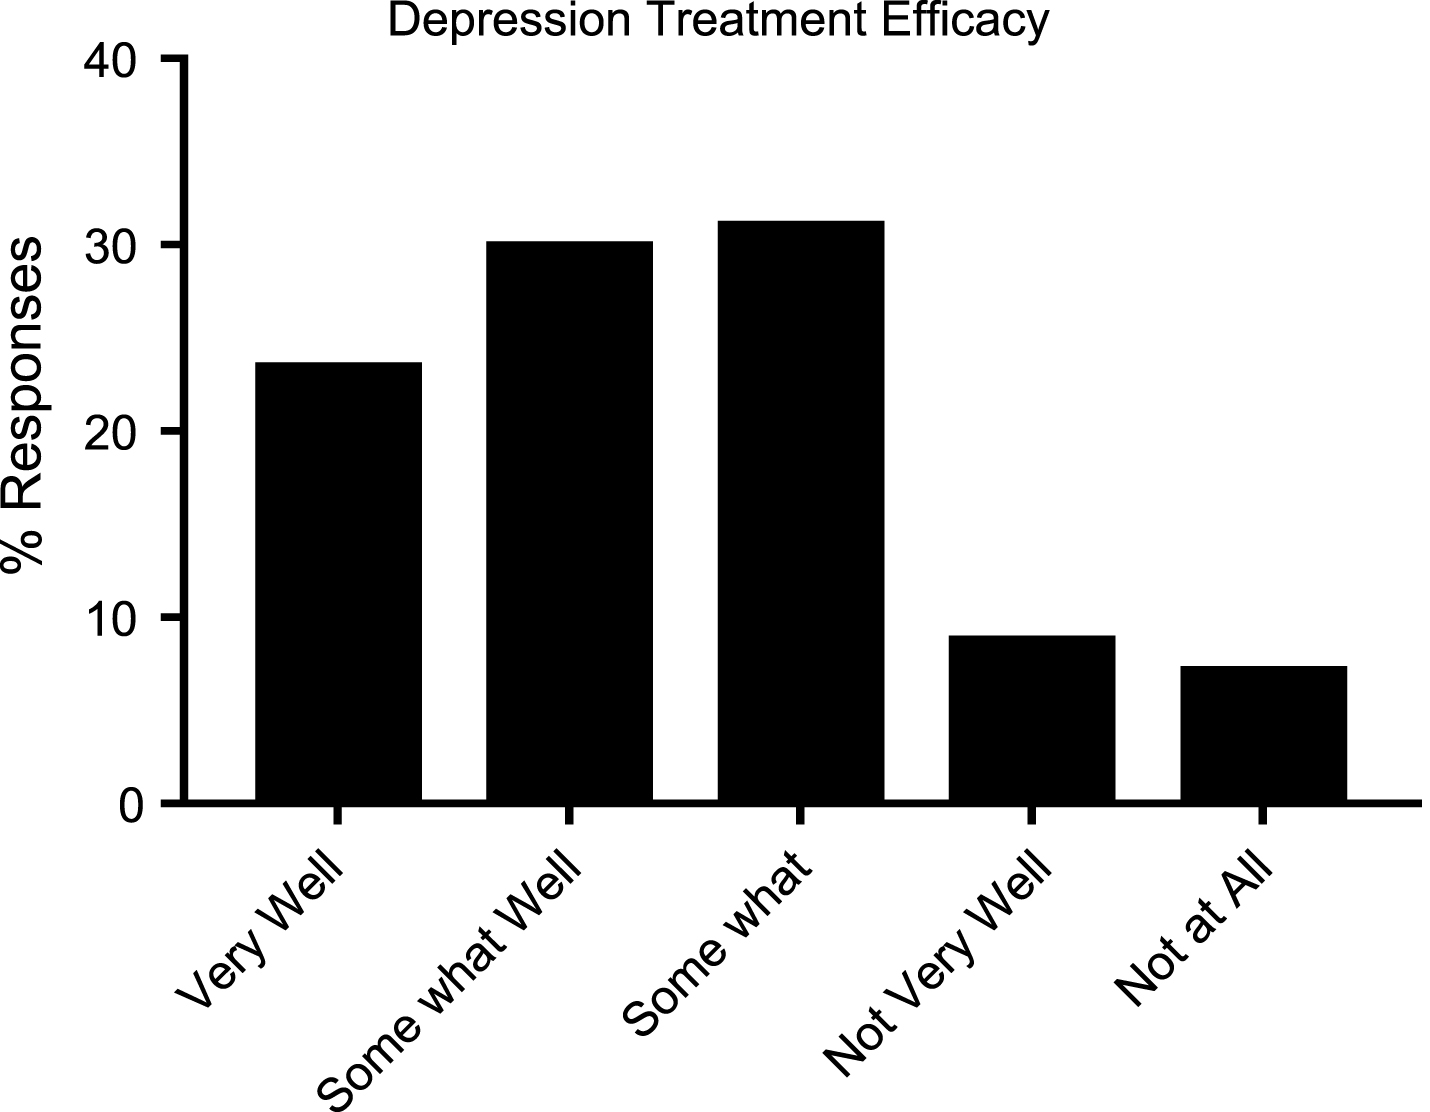 Reported efficacy of available treatment for depression in HD patients (N = 184).